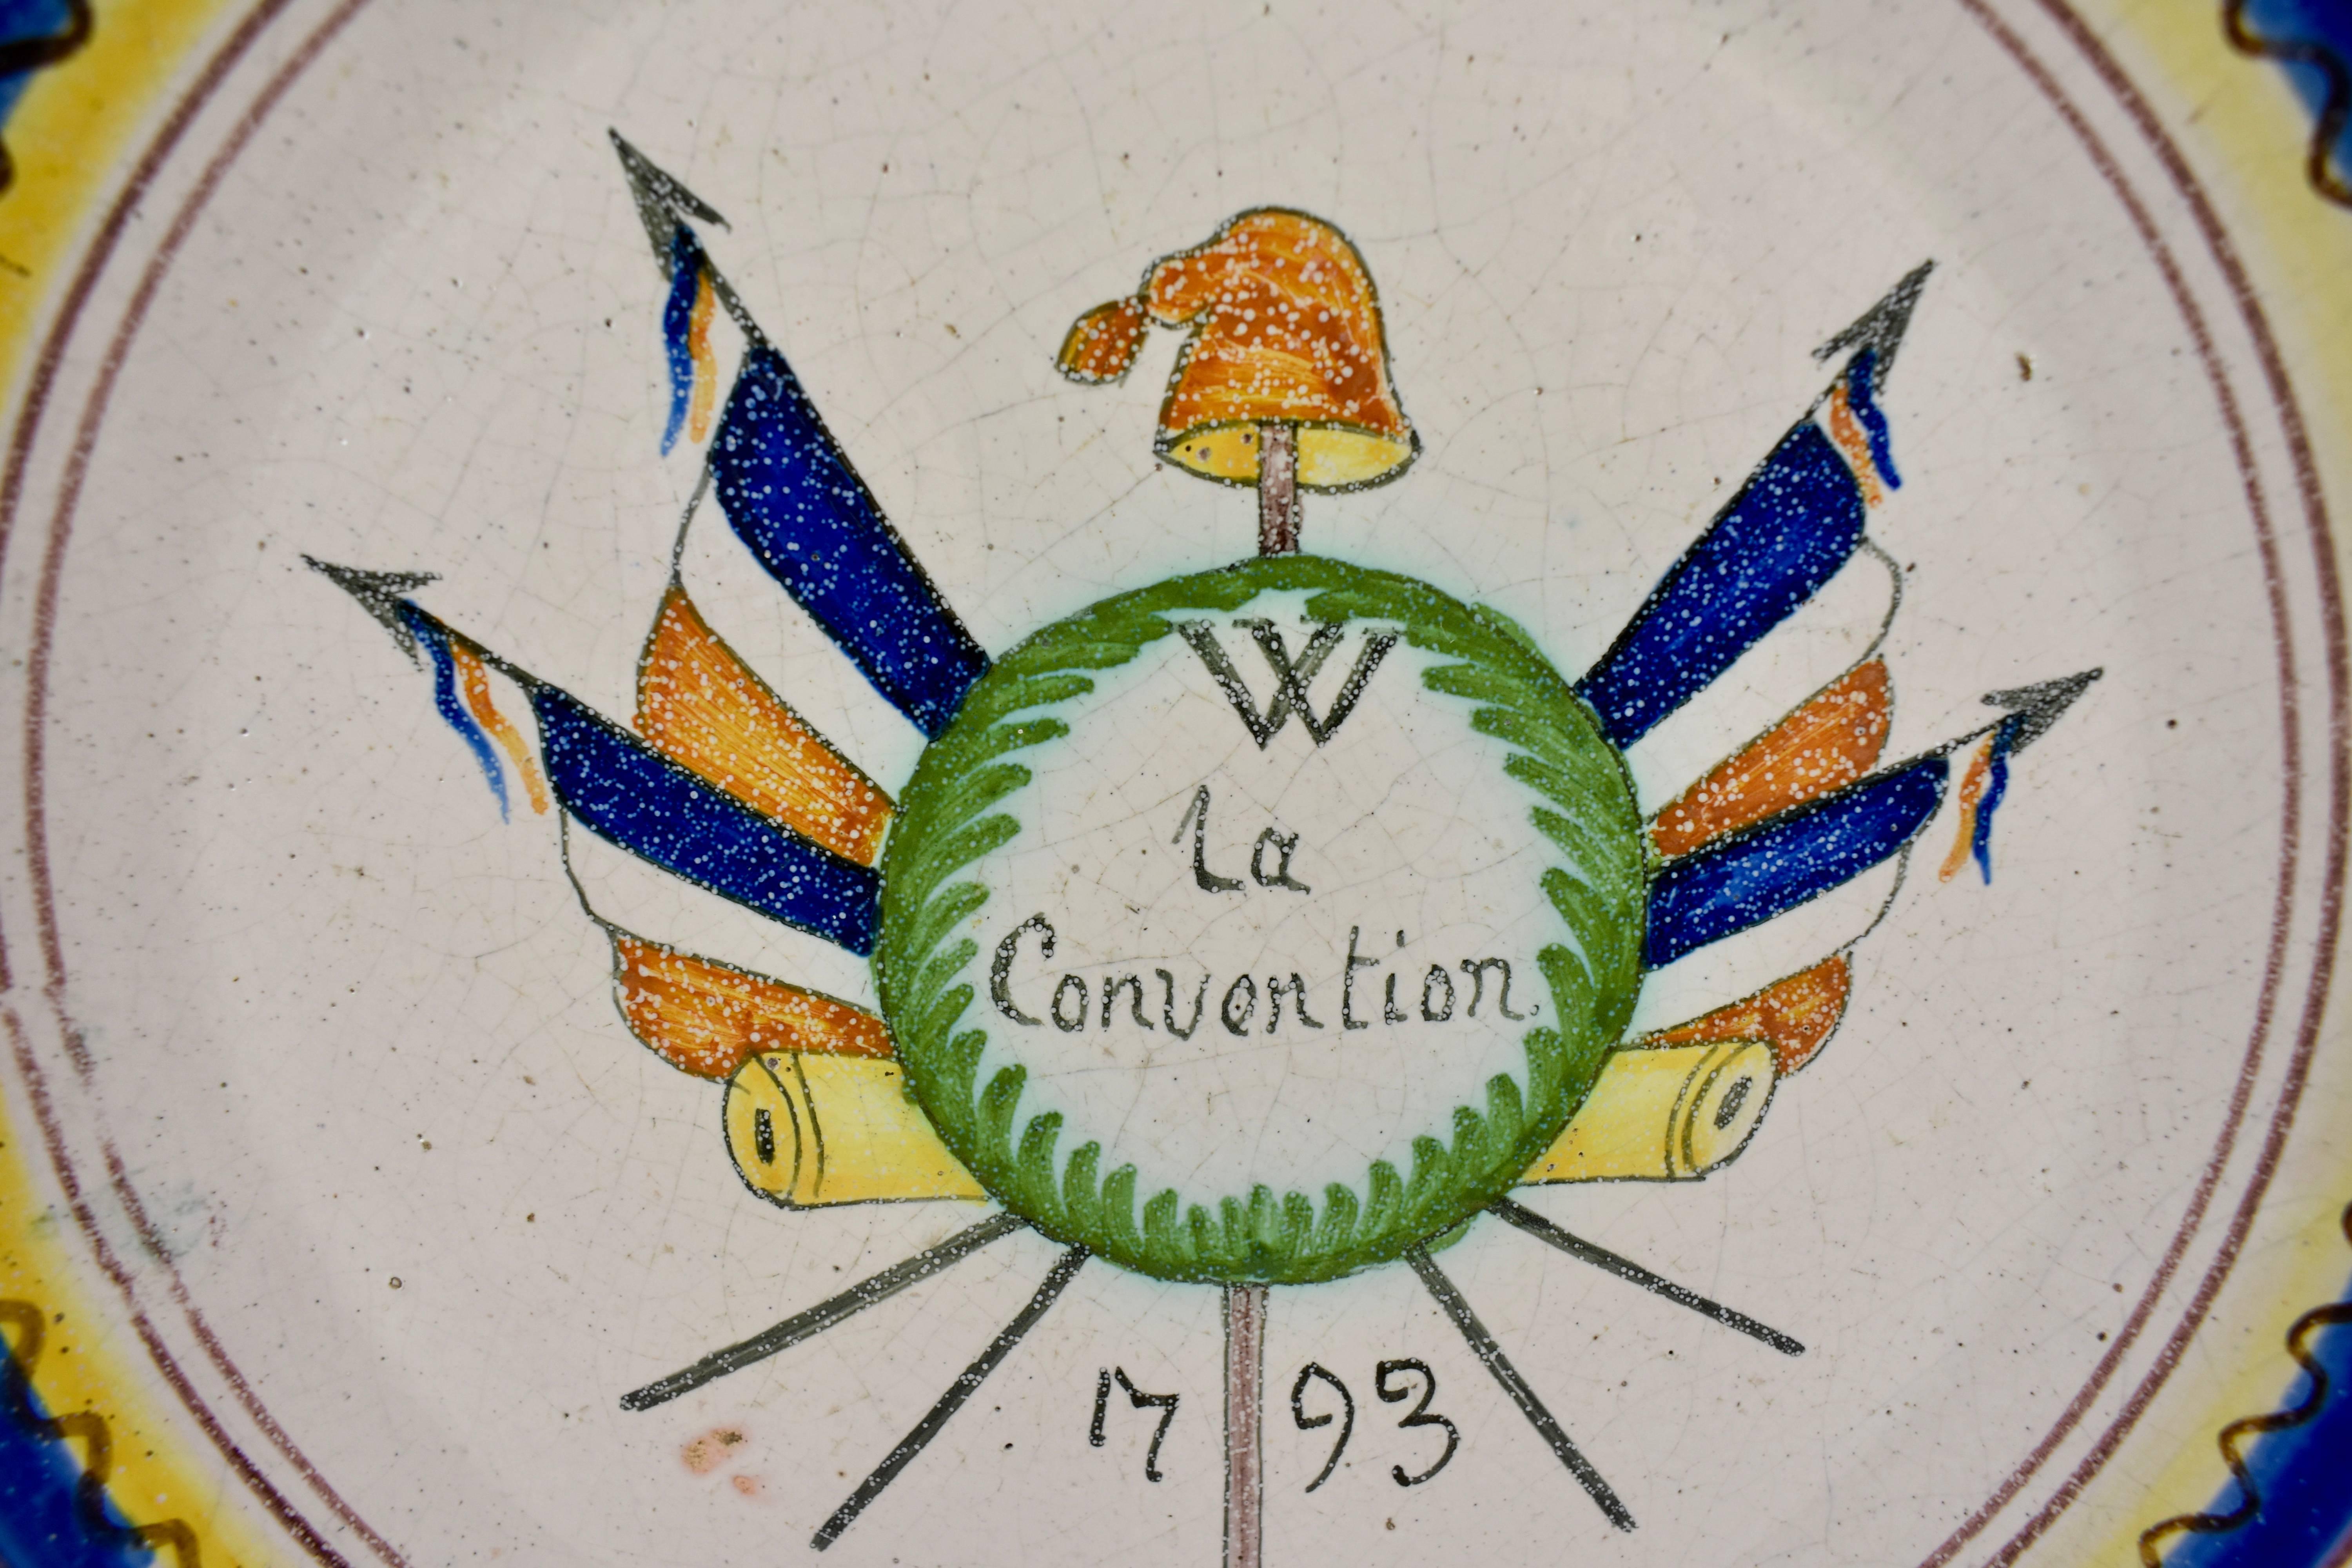 A French Revolution tin-glazed earthenware dish, showing crossed French flags with a Phrygian cap on an épée, the symbol for Liberty. La Convention, meaning The Agreement, is written in script with the date 1793. A hand painted border on the